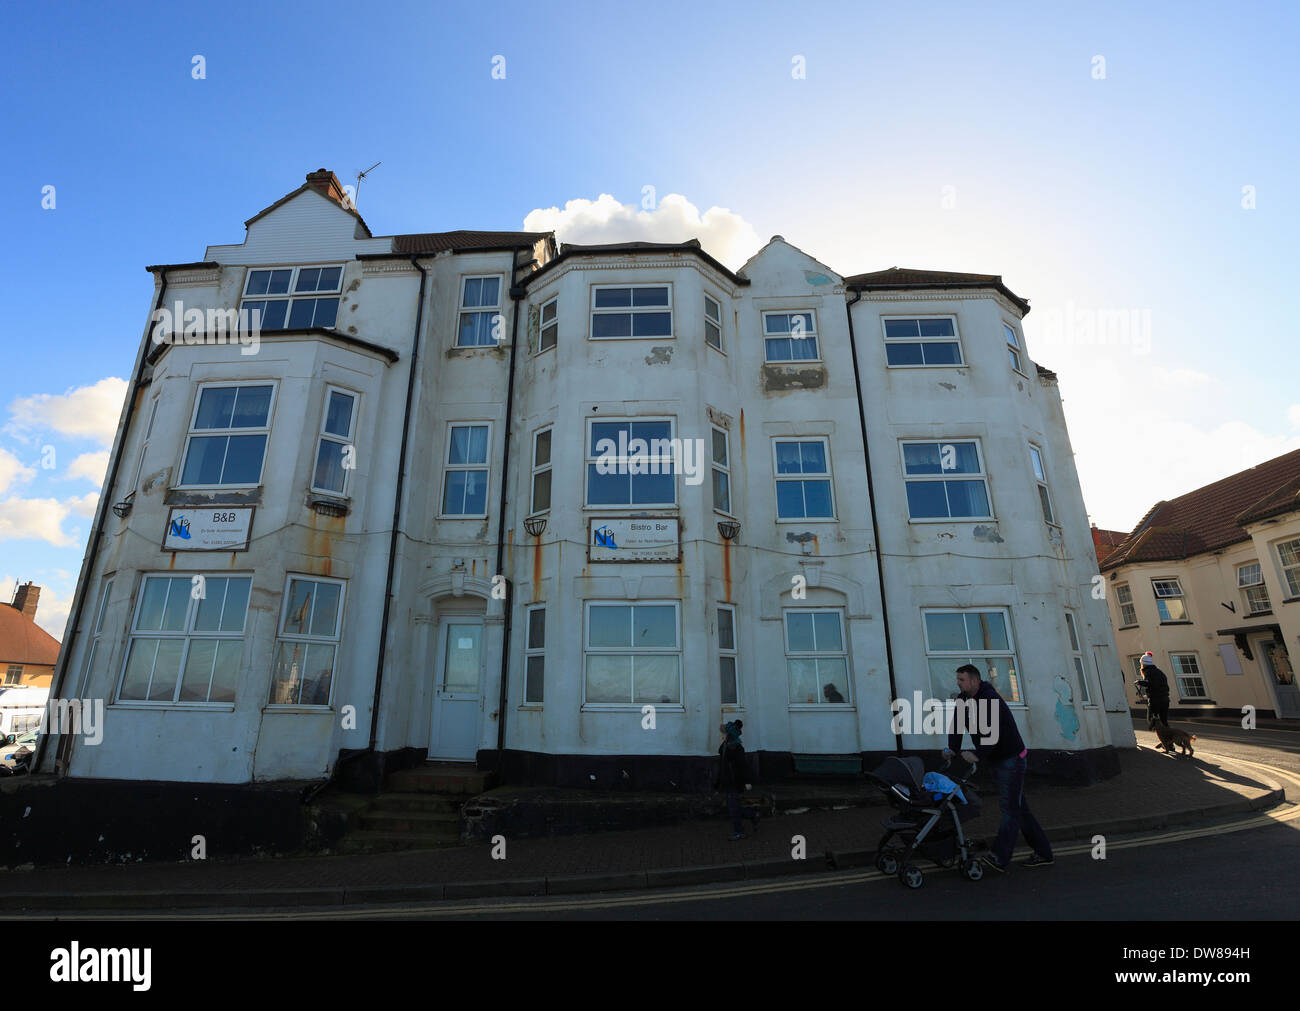 Sheringham seafront hotel which appears to be closed and in need of some attention. Stock Photo